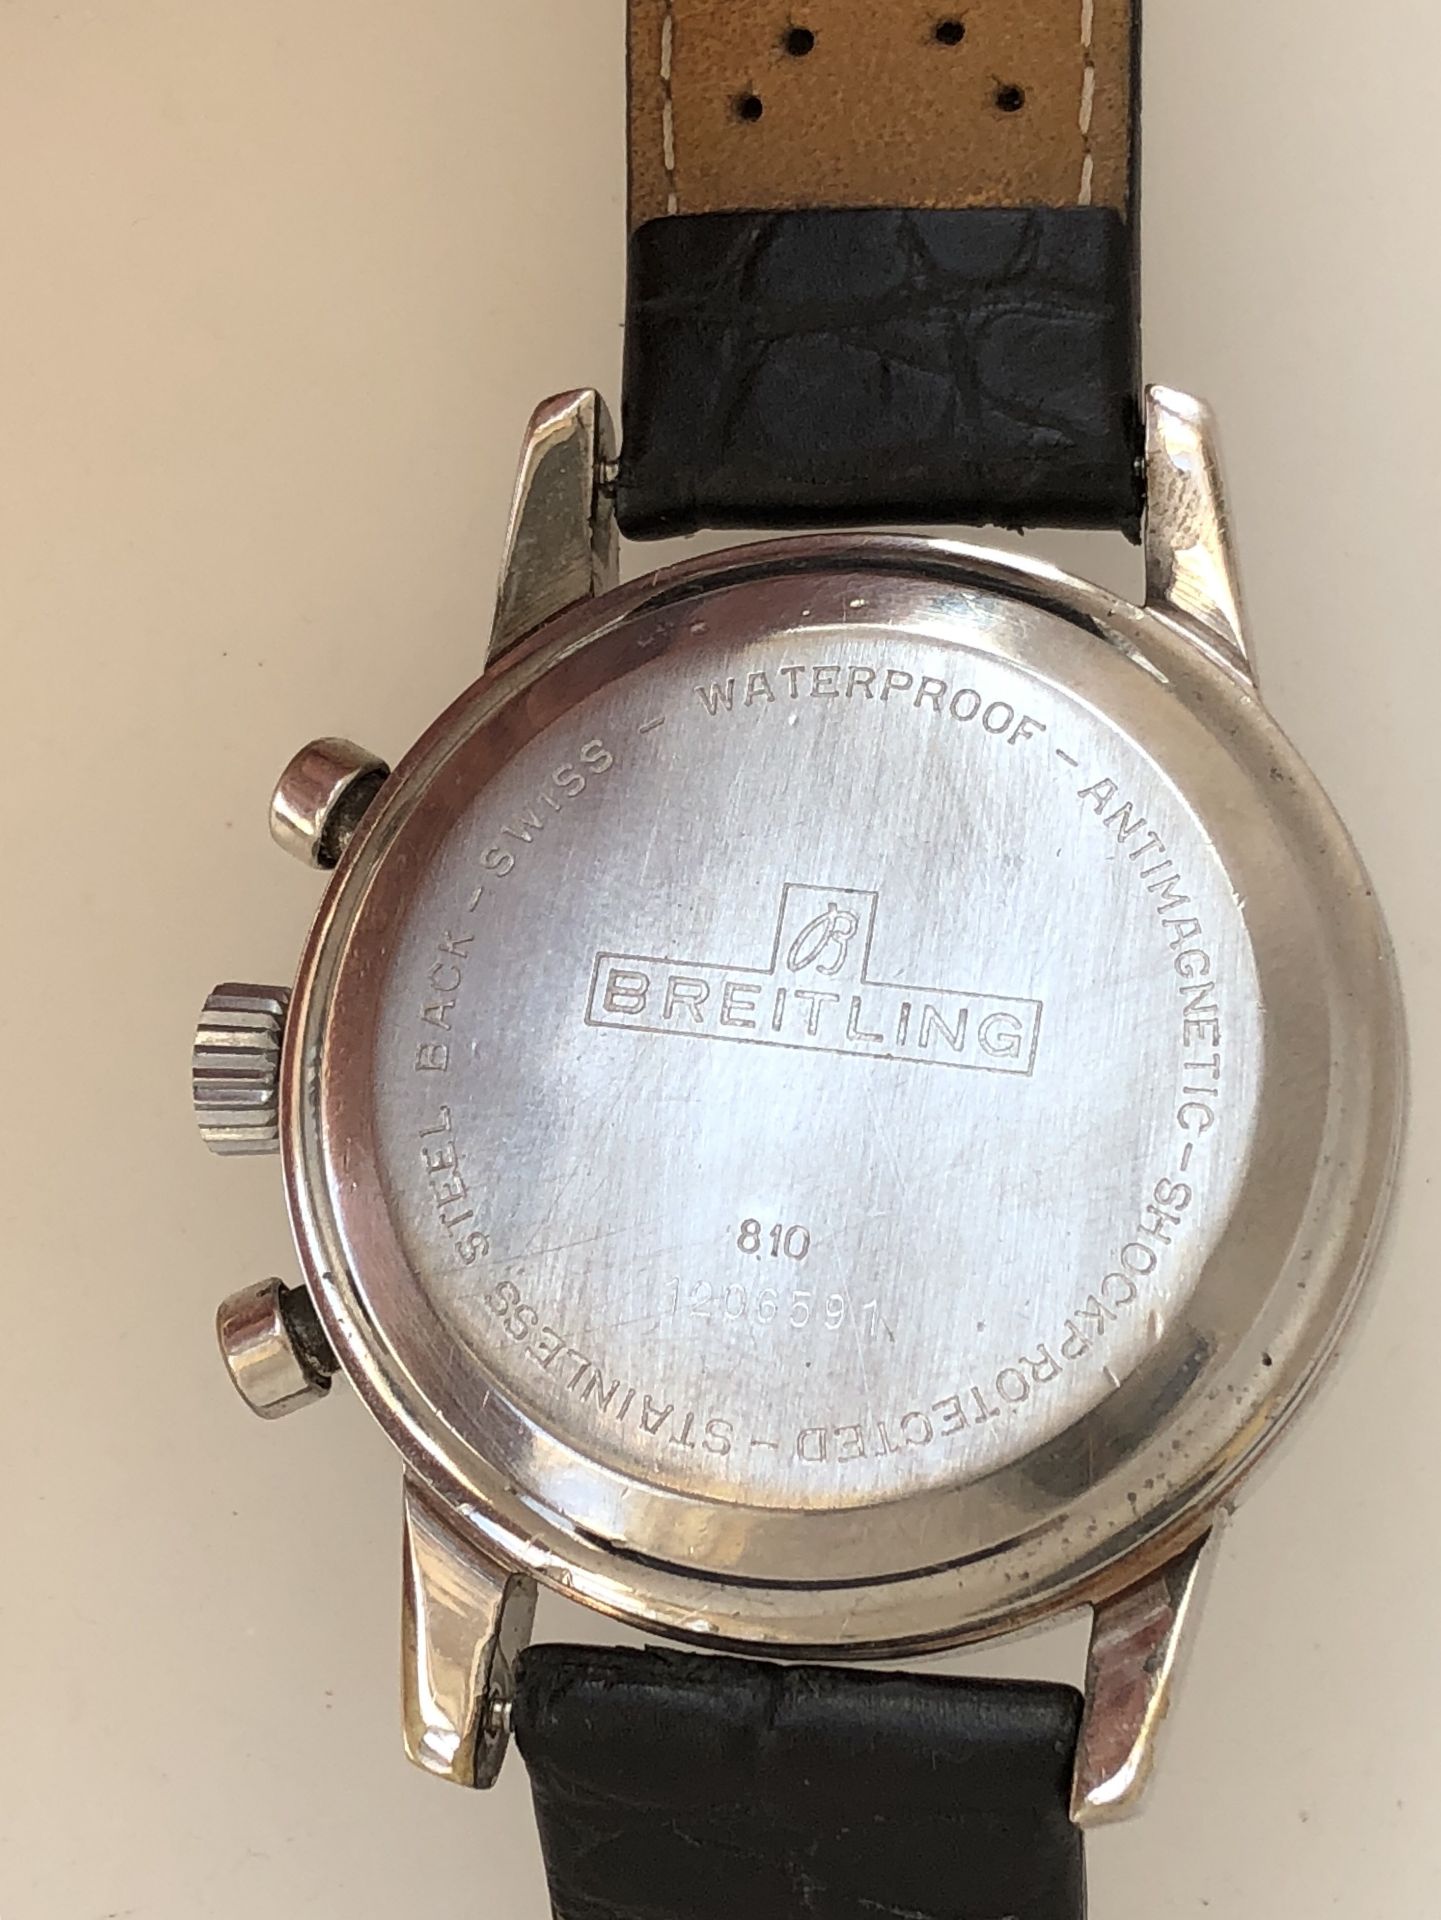 1968 Reverse Panda Dial Breitling Top Time 810 Chronograph - Image 3 of 3